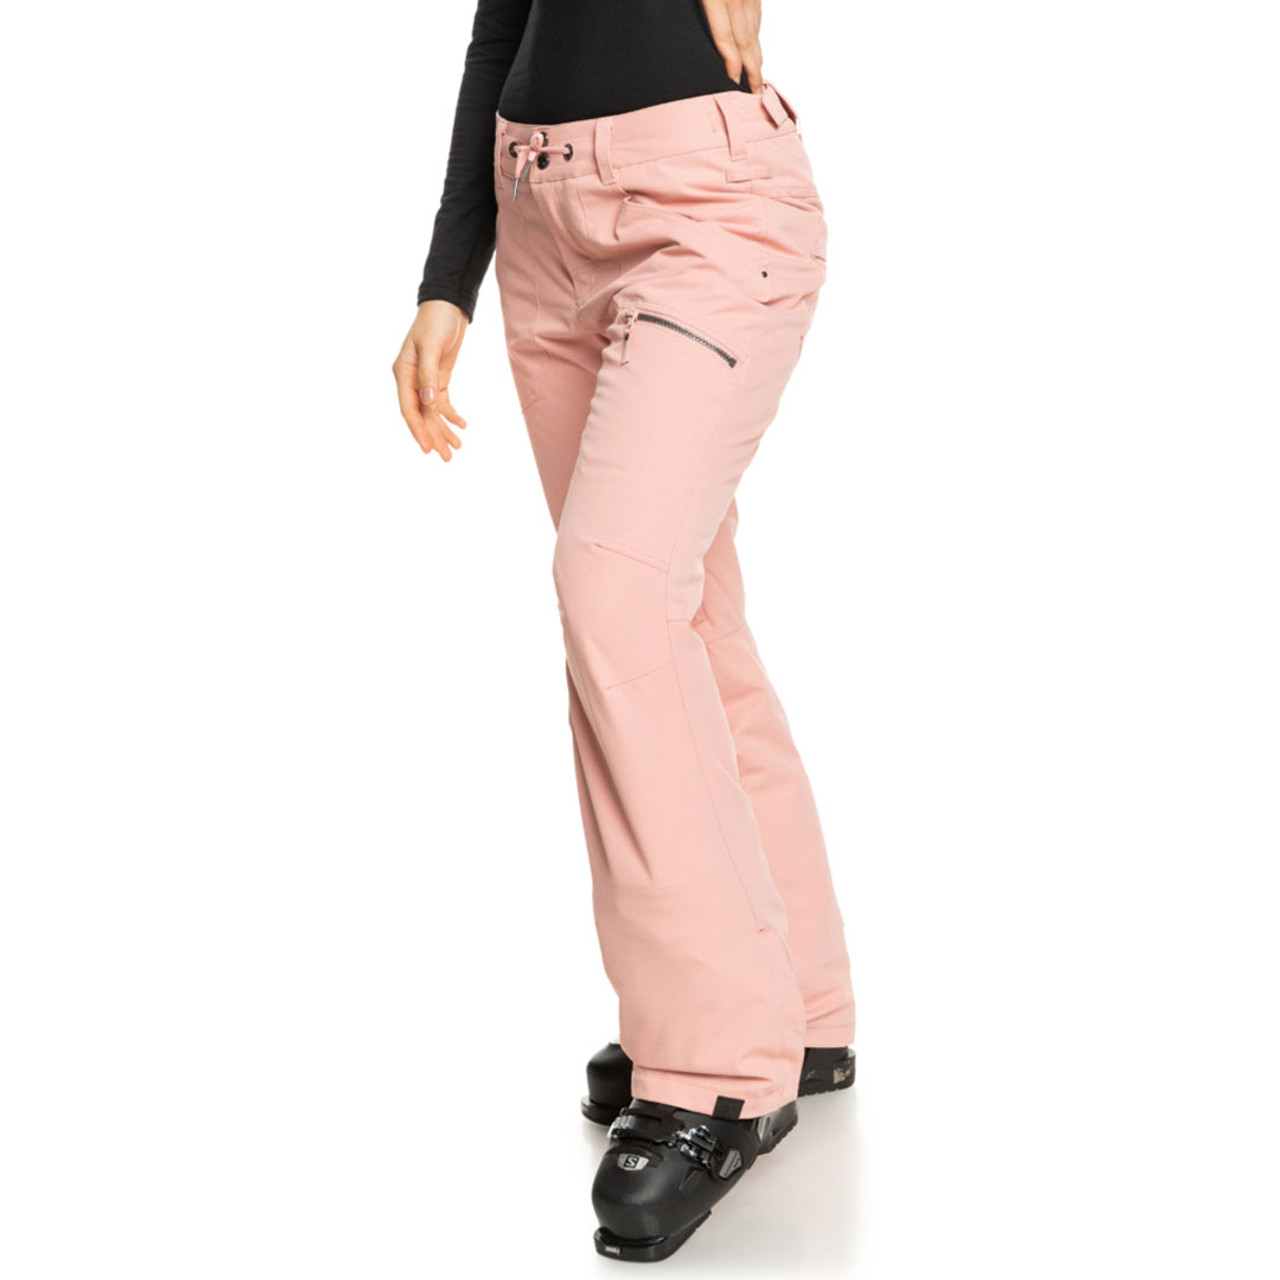 Roxy Rising High Ski Pants In Pink, 50% OFF